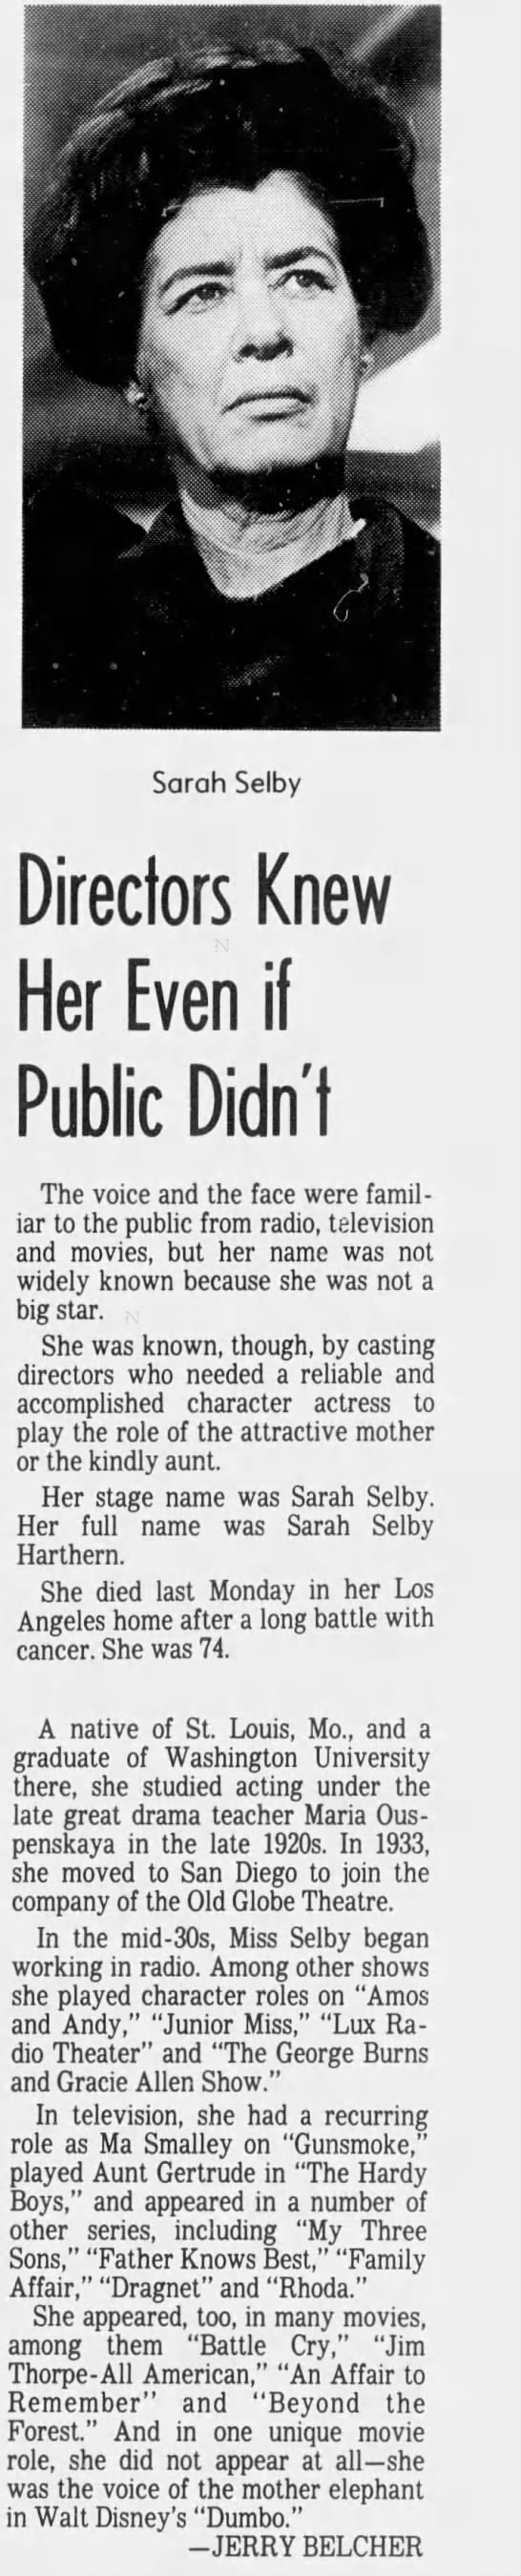 Sarah Selby: Directors Knew Her Even If Public Didn't. - 